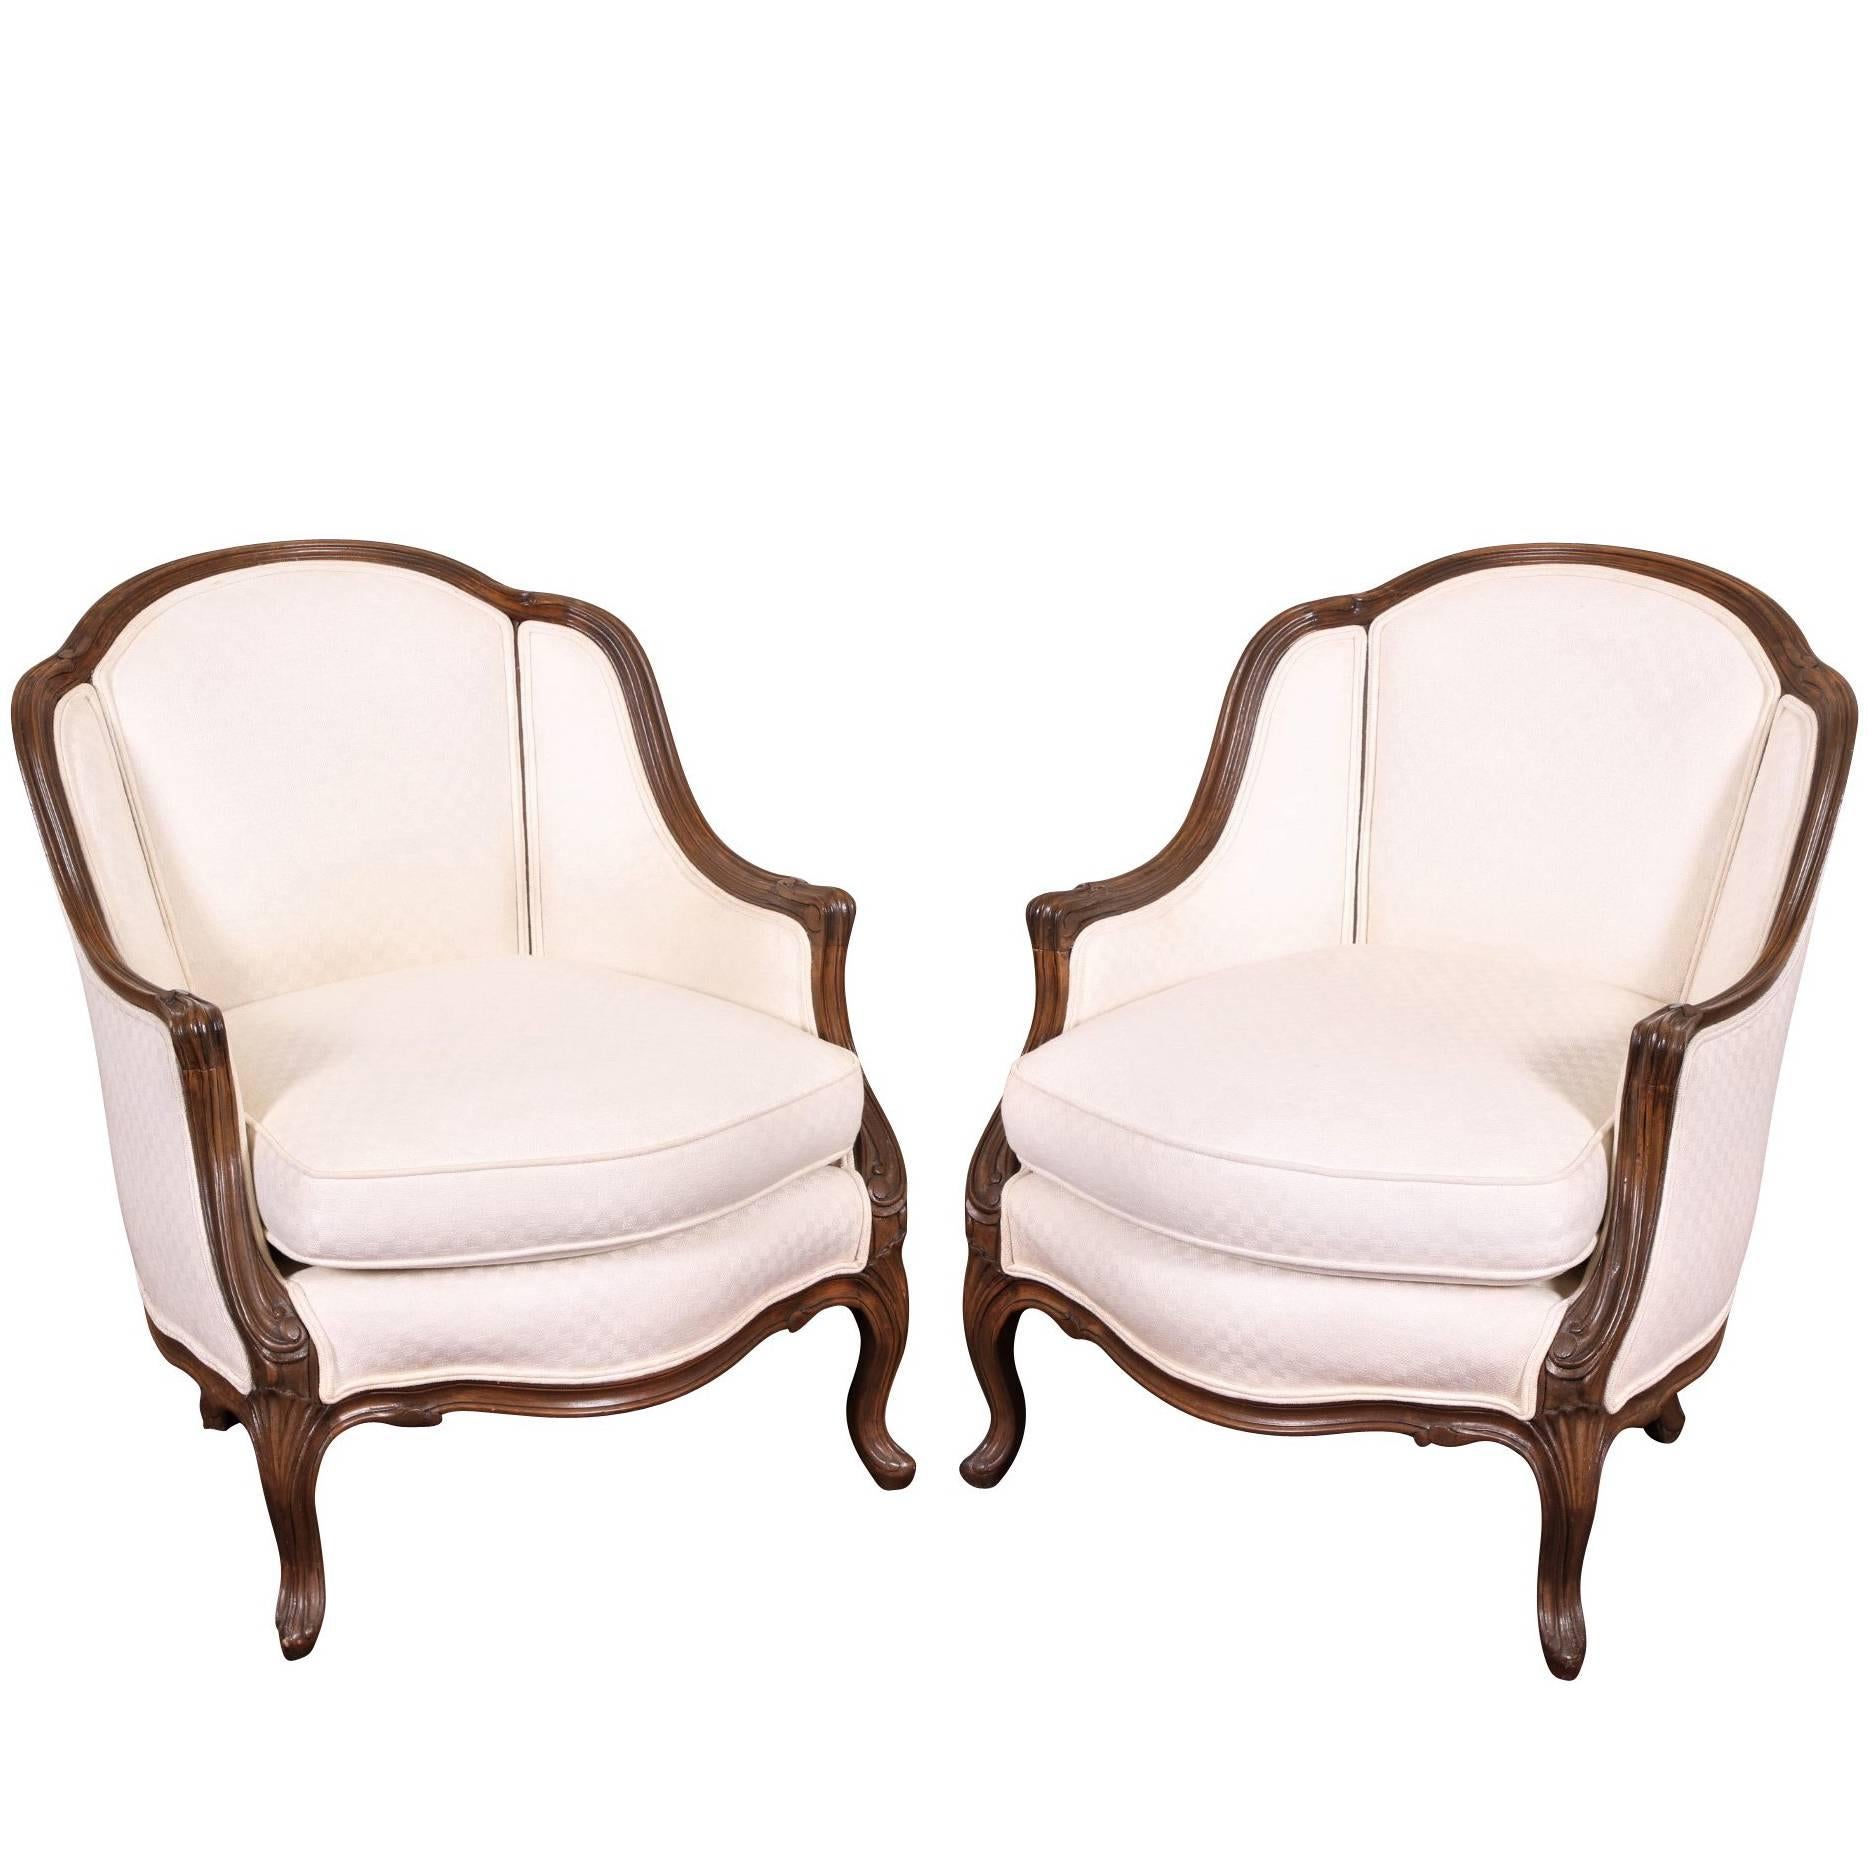 Pair of Petite Bergeres in White Upholstery